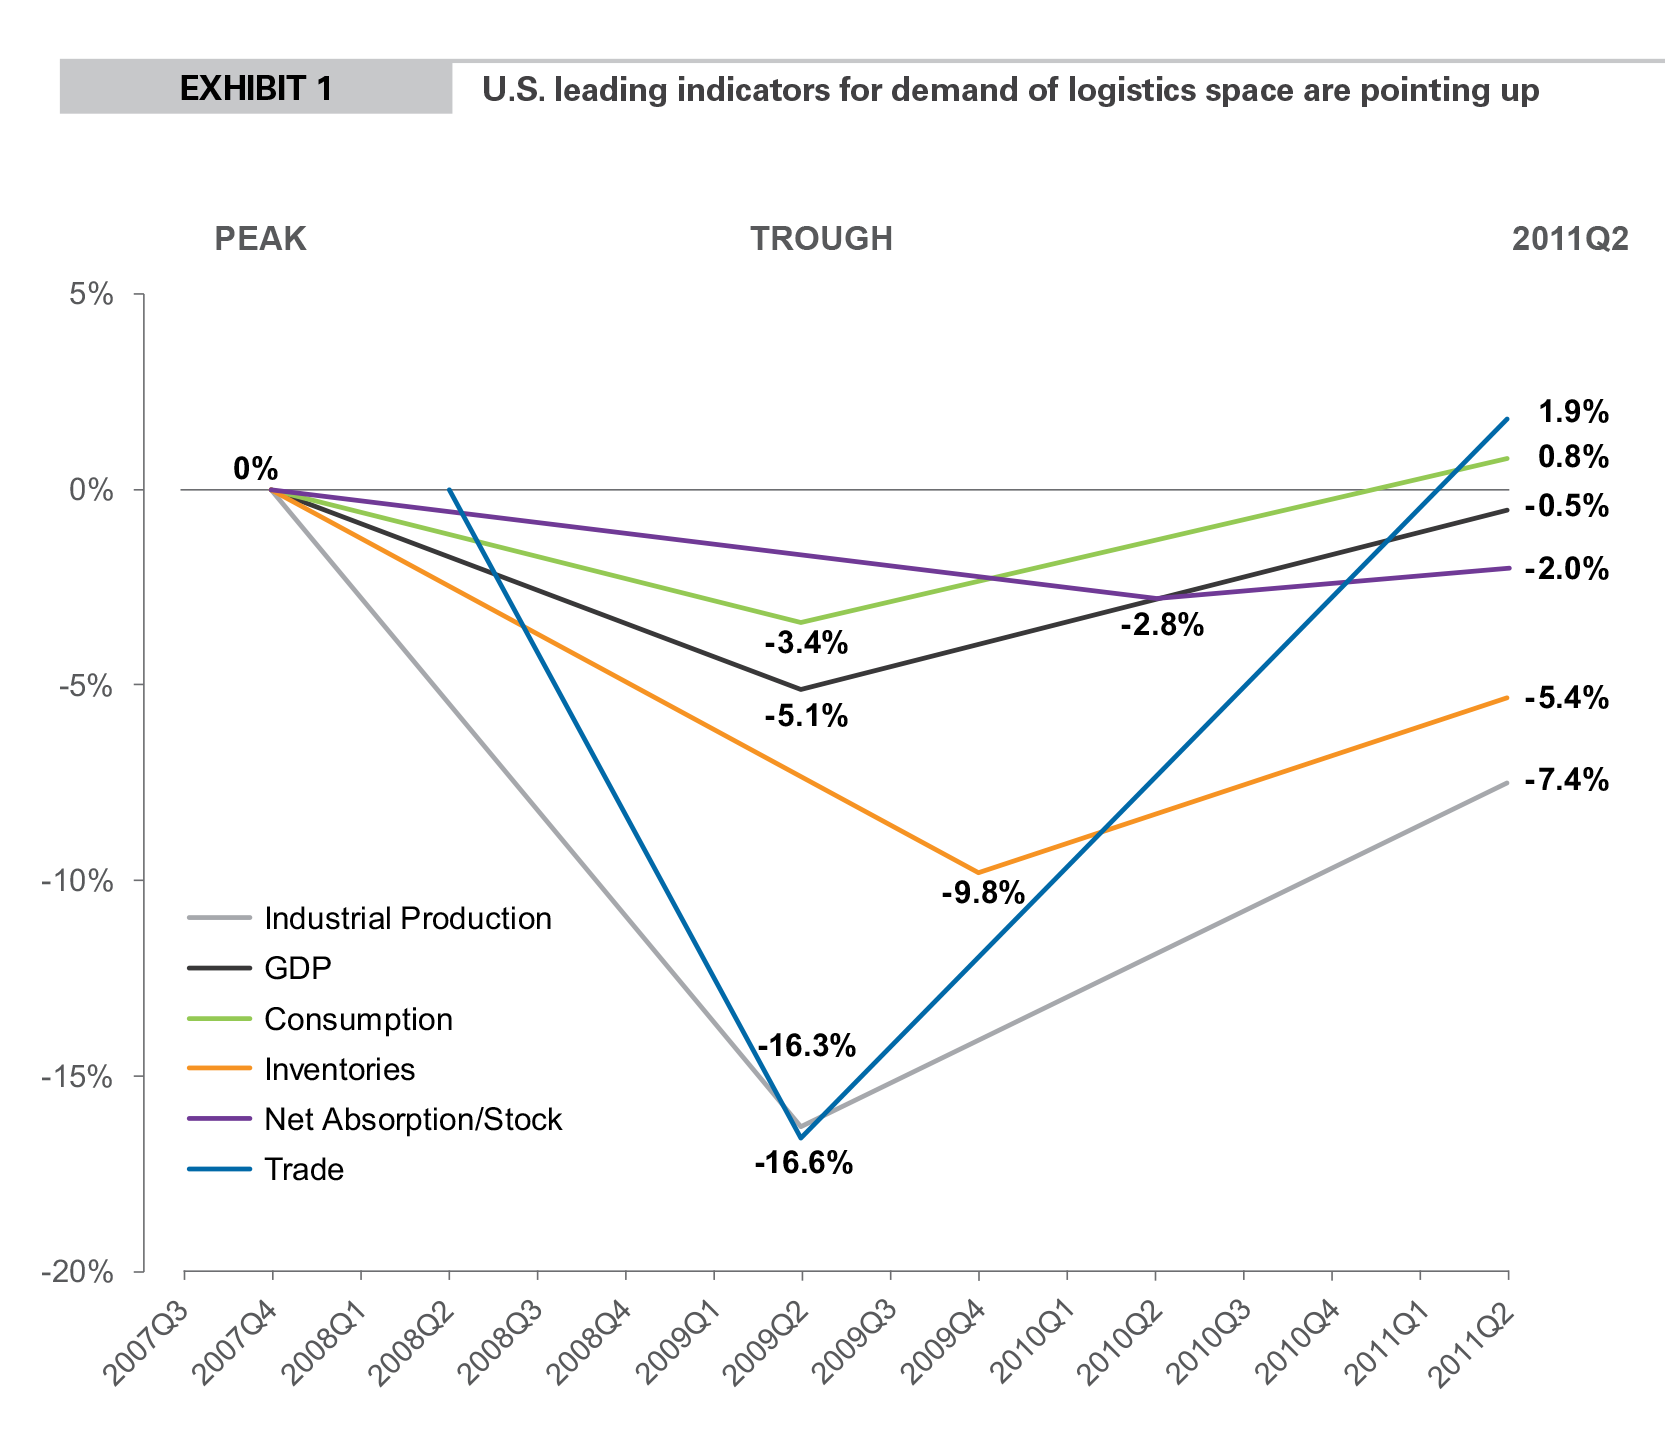 EXHIBIT 1 U.S. leading indicators for demand of logistics space are pointing up